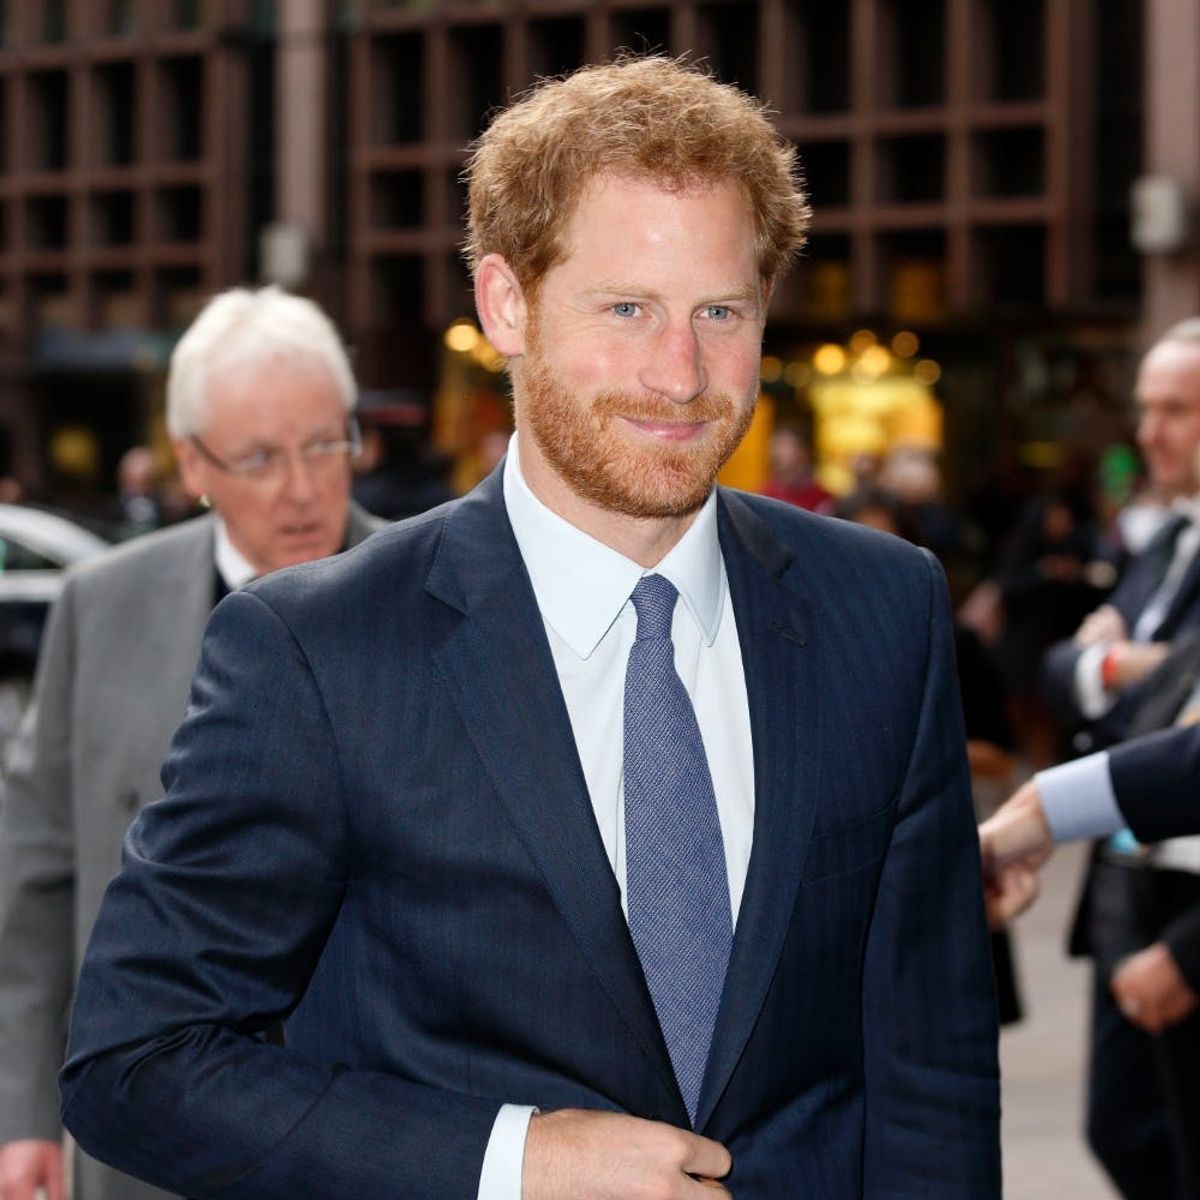 The First Pics of Prince Harry and GF Meghan Markle Together Will Make You Swoon